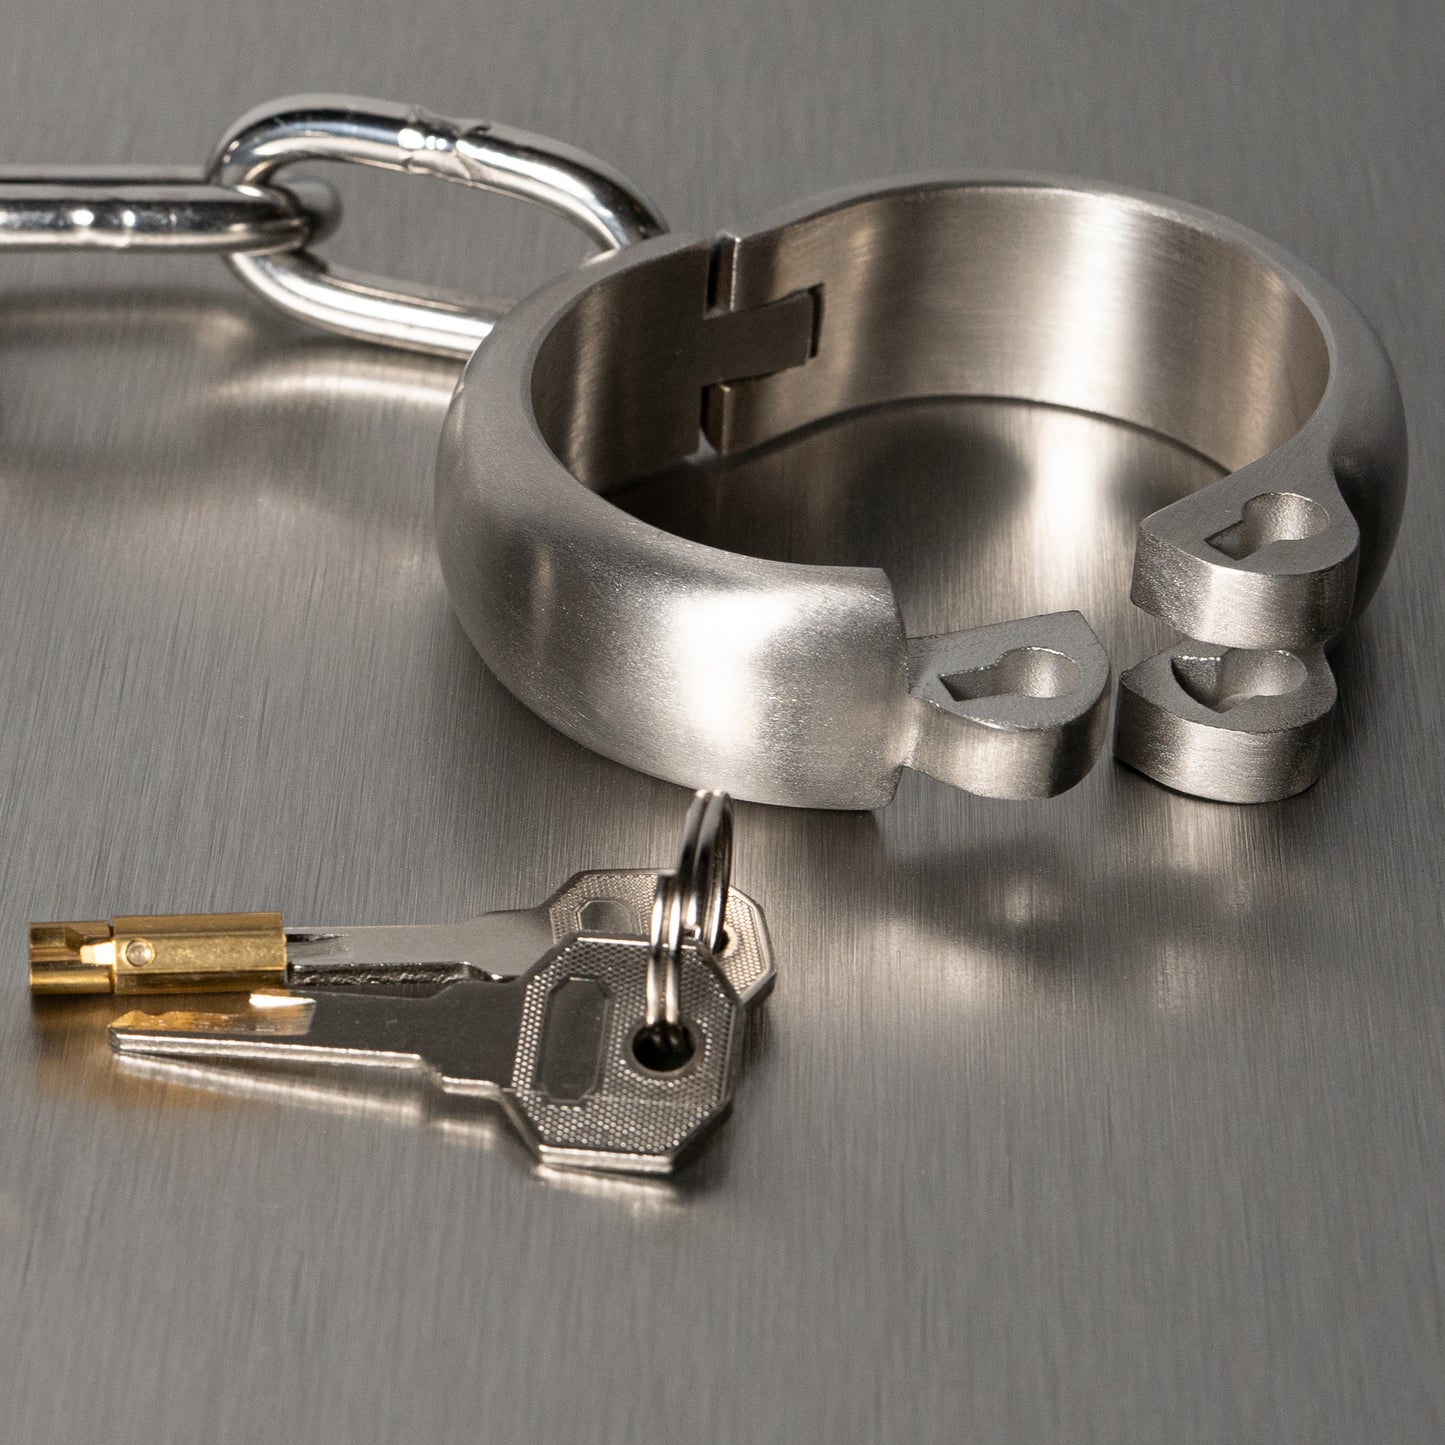 Solid stainless steel shackles with key lock and chain